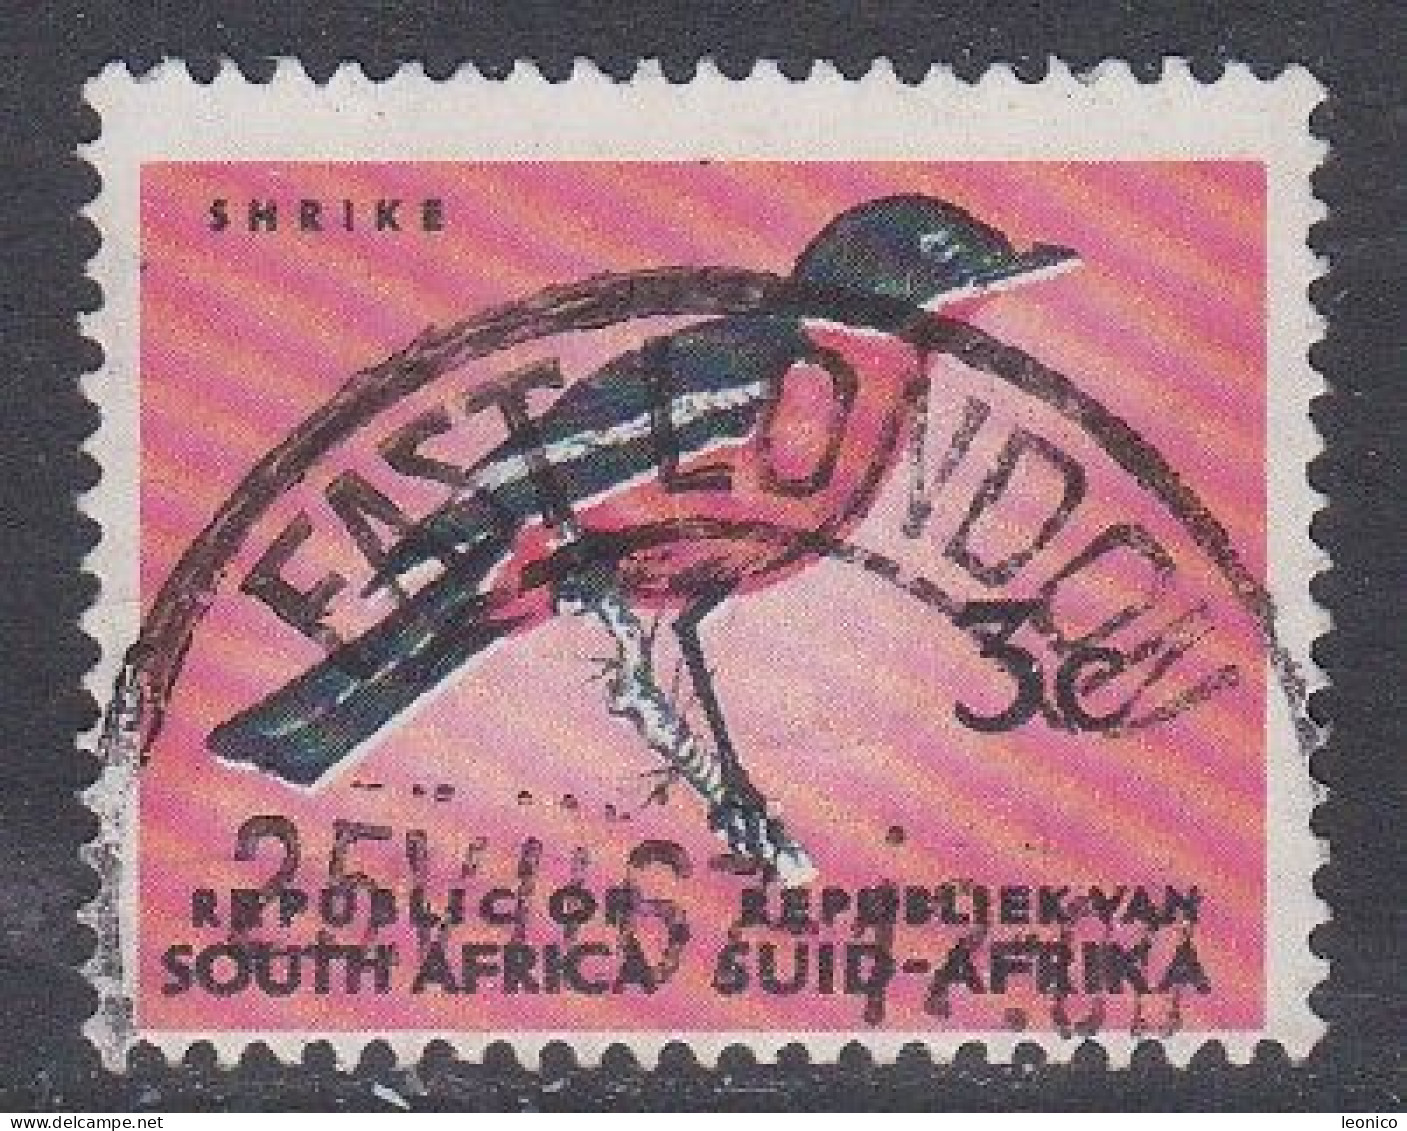 SOUTH AFRICA 1969 / Mi: 395 / Yx561 - Used Stamps